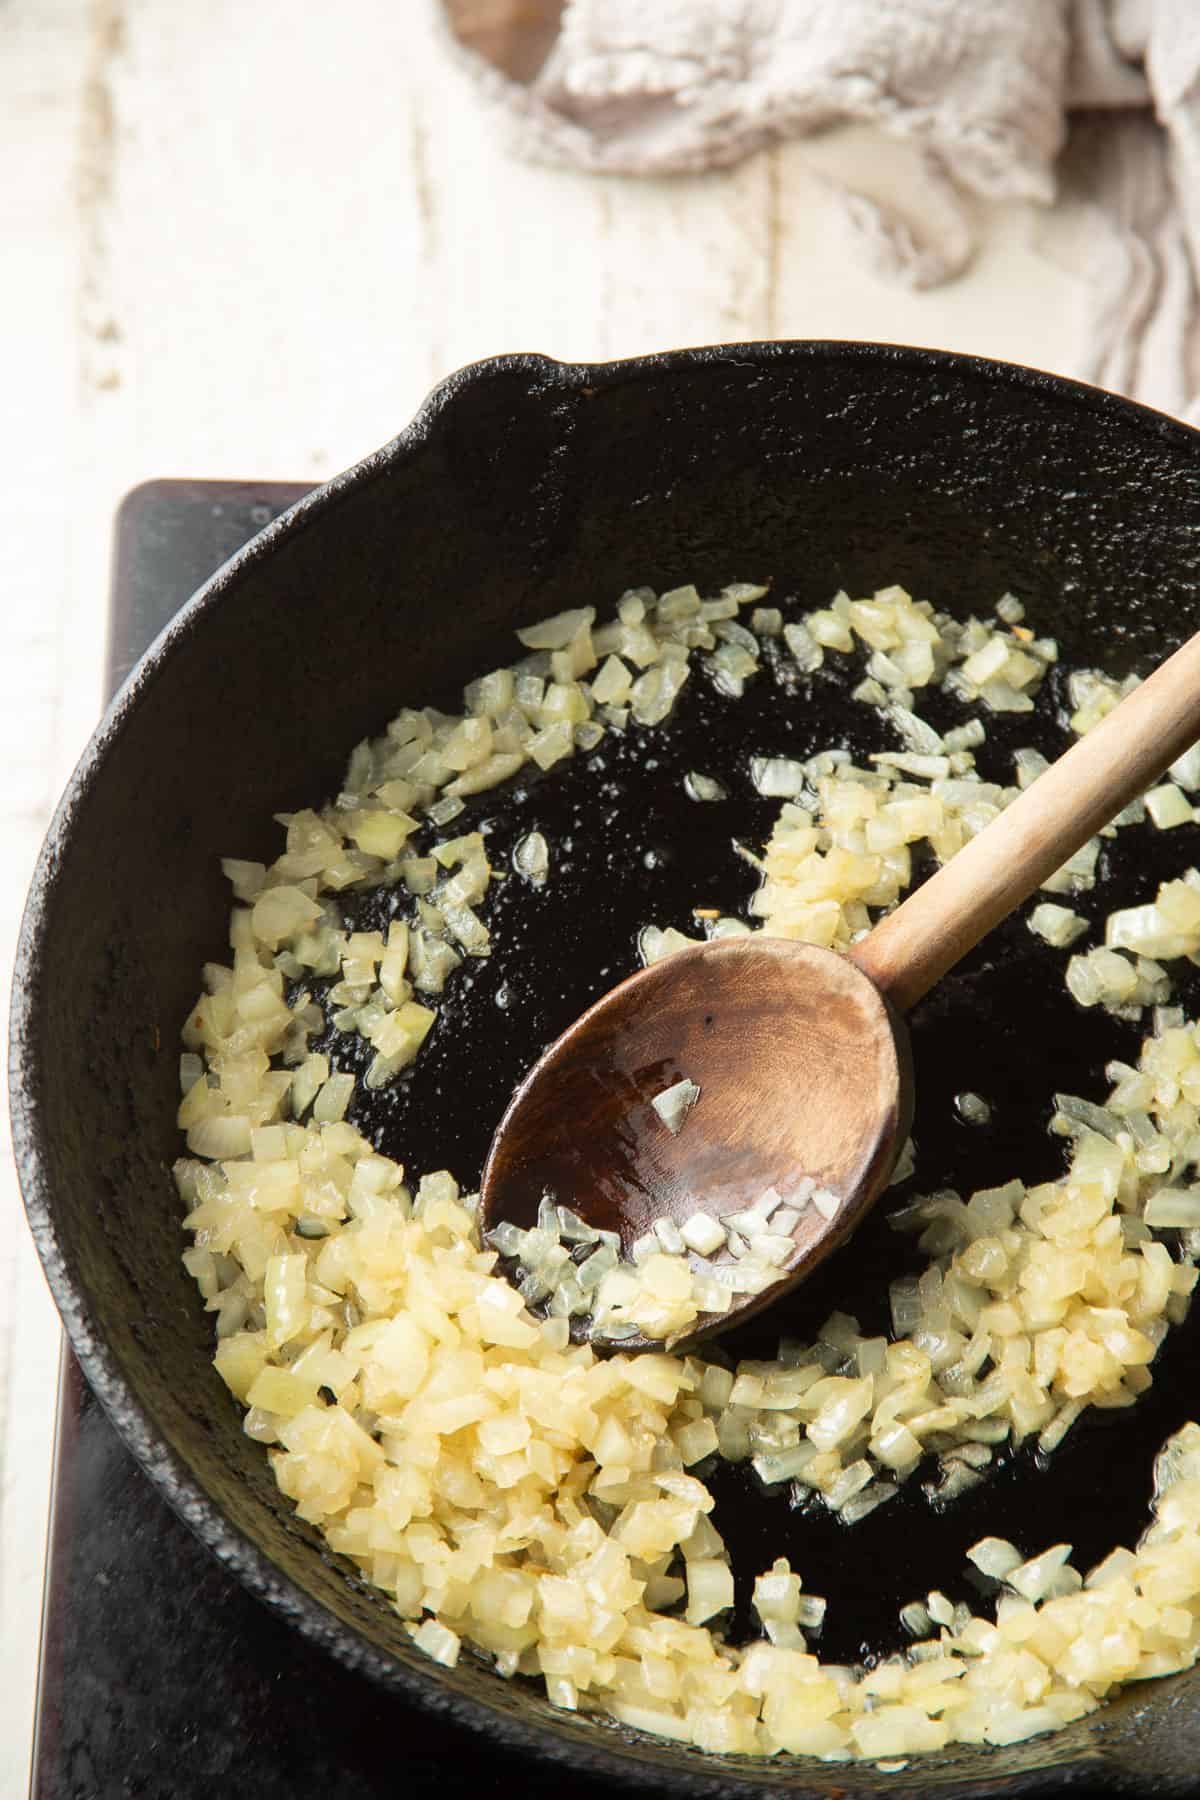 Onions cooking in a skillet with a wooden spoon.